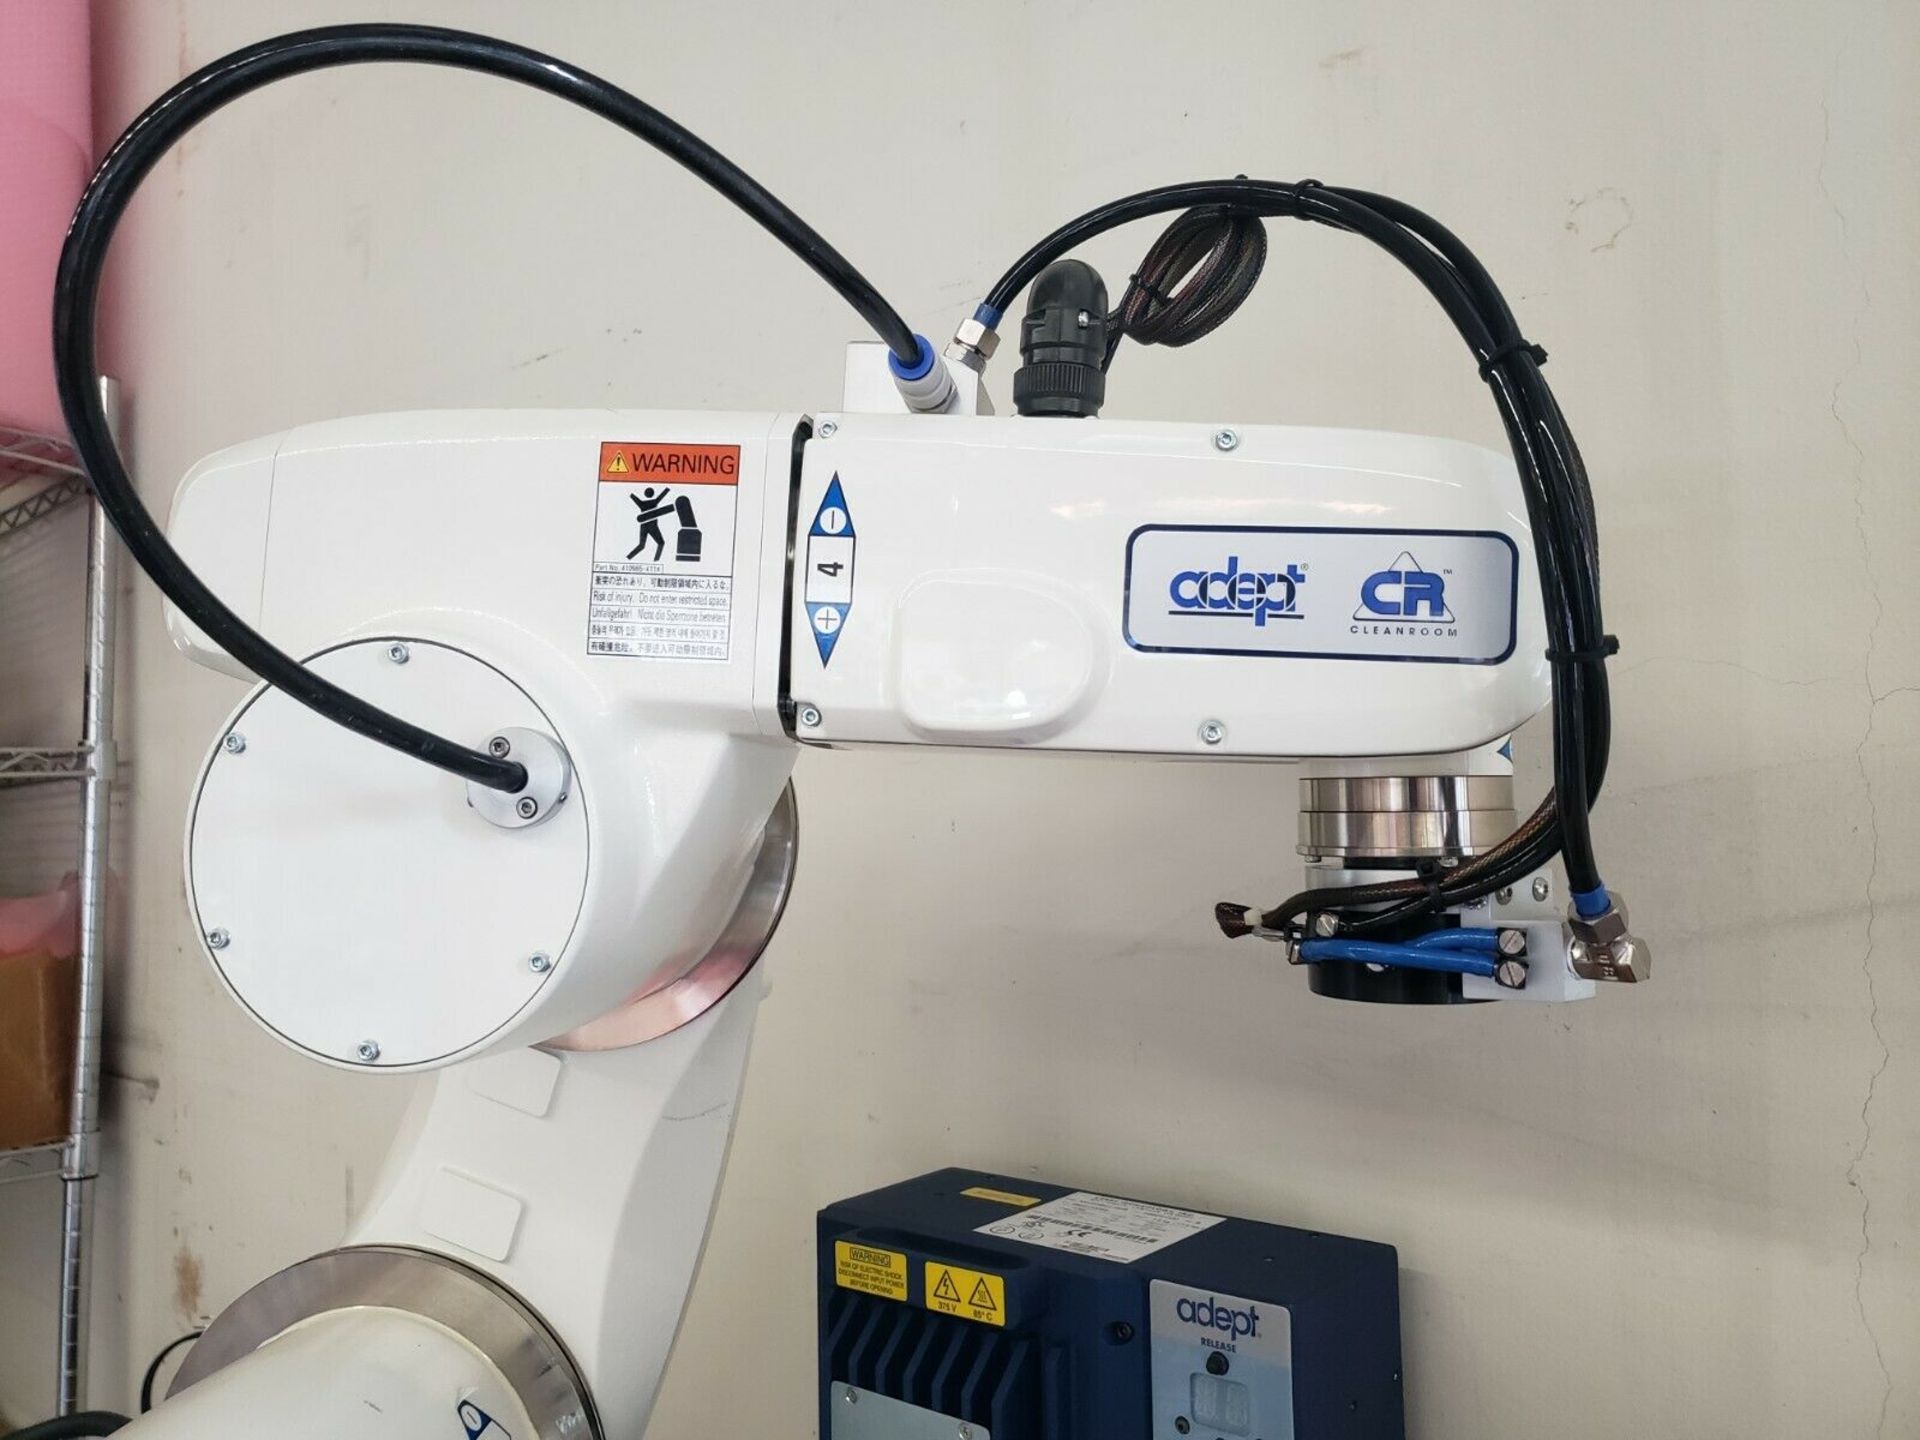 Adept Viper S650 Cleanroom Robot With Controller, Pendant, Aligner, Cables Etc - Image 6 of 12